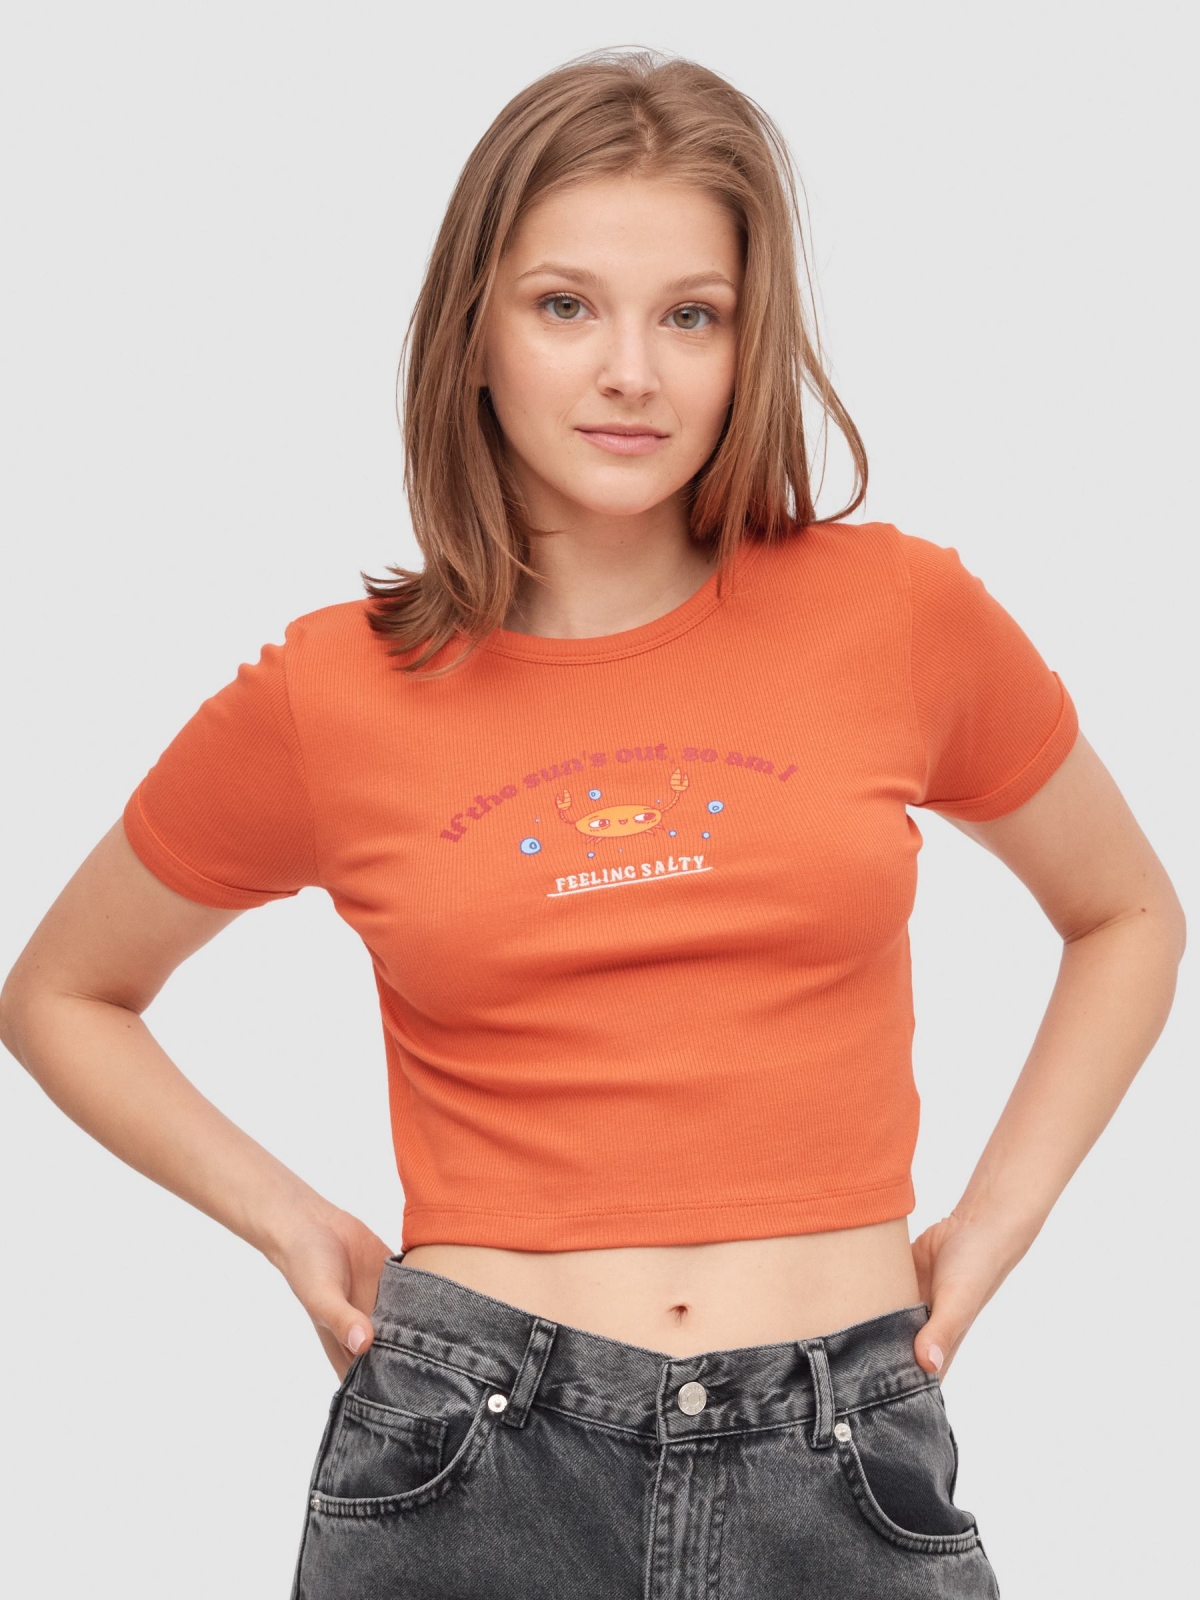 Crab rib t-shirt salmon middle front view